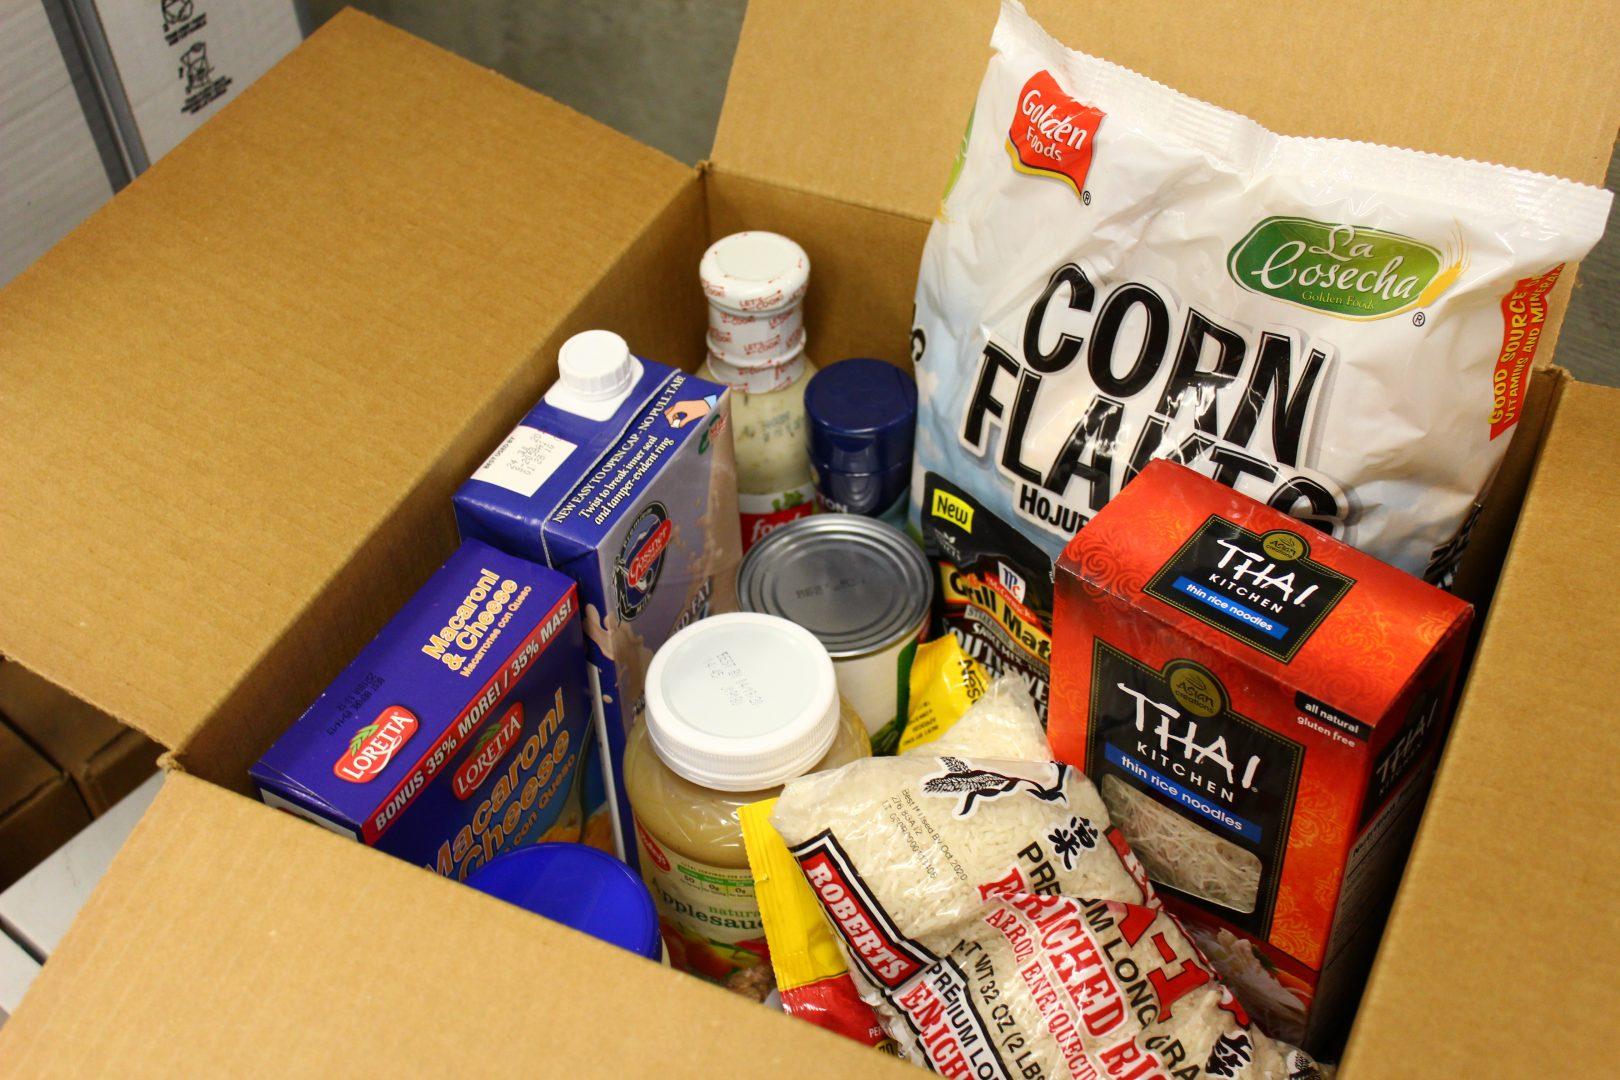 The student cupboards winter closure meal boxes contain enough food and recipes to last about five days, thanks in part to a $5,000 grant from Kaiser Permanente Fresno. (Paige Gibbs/The Collegian)